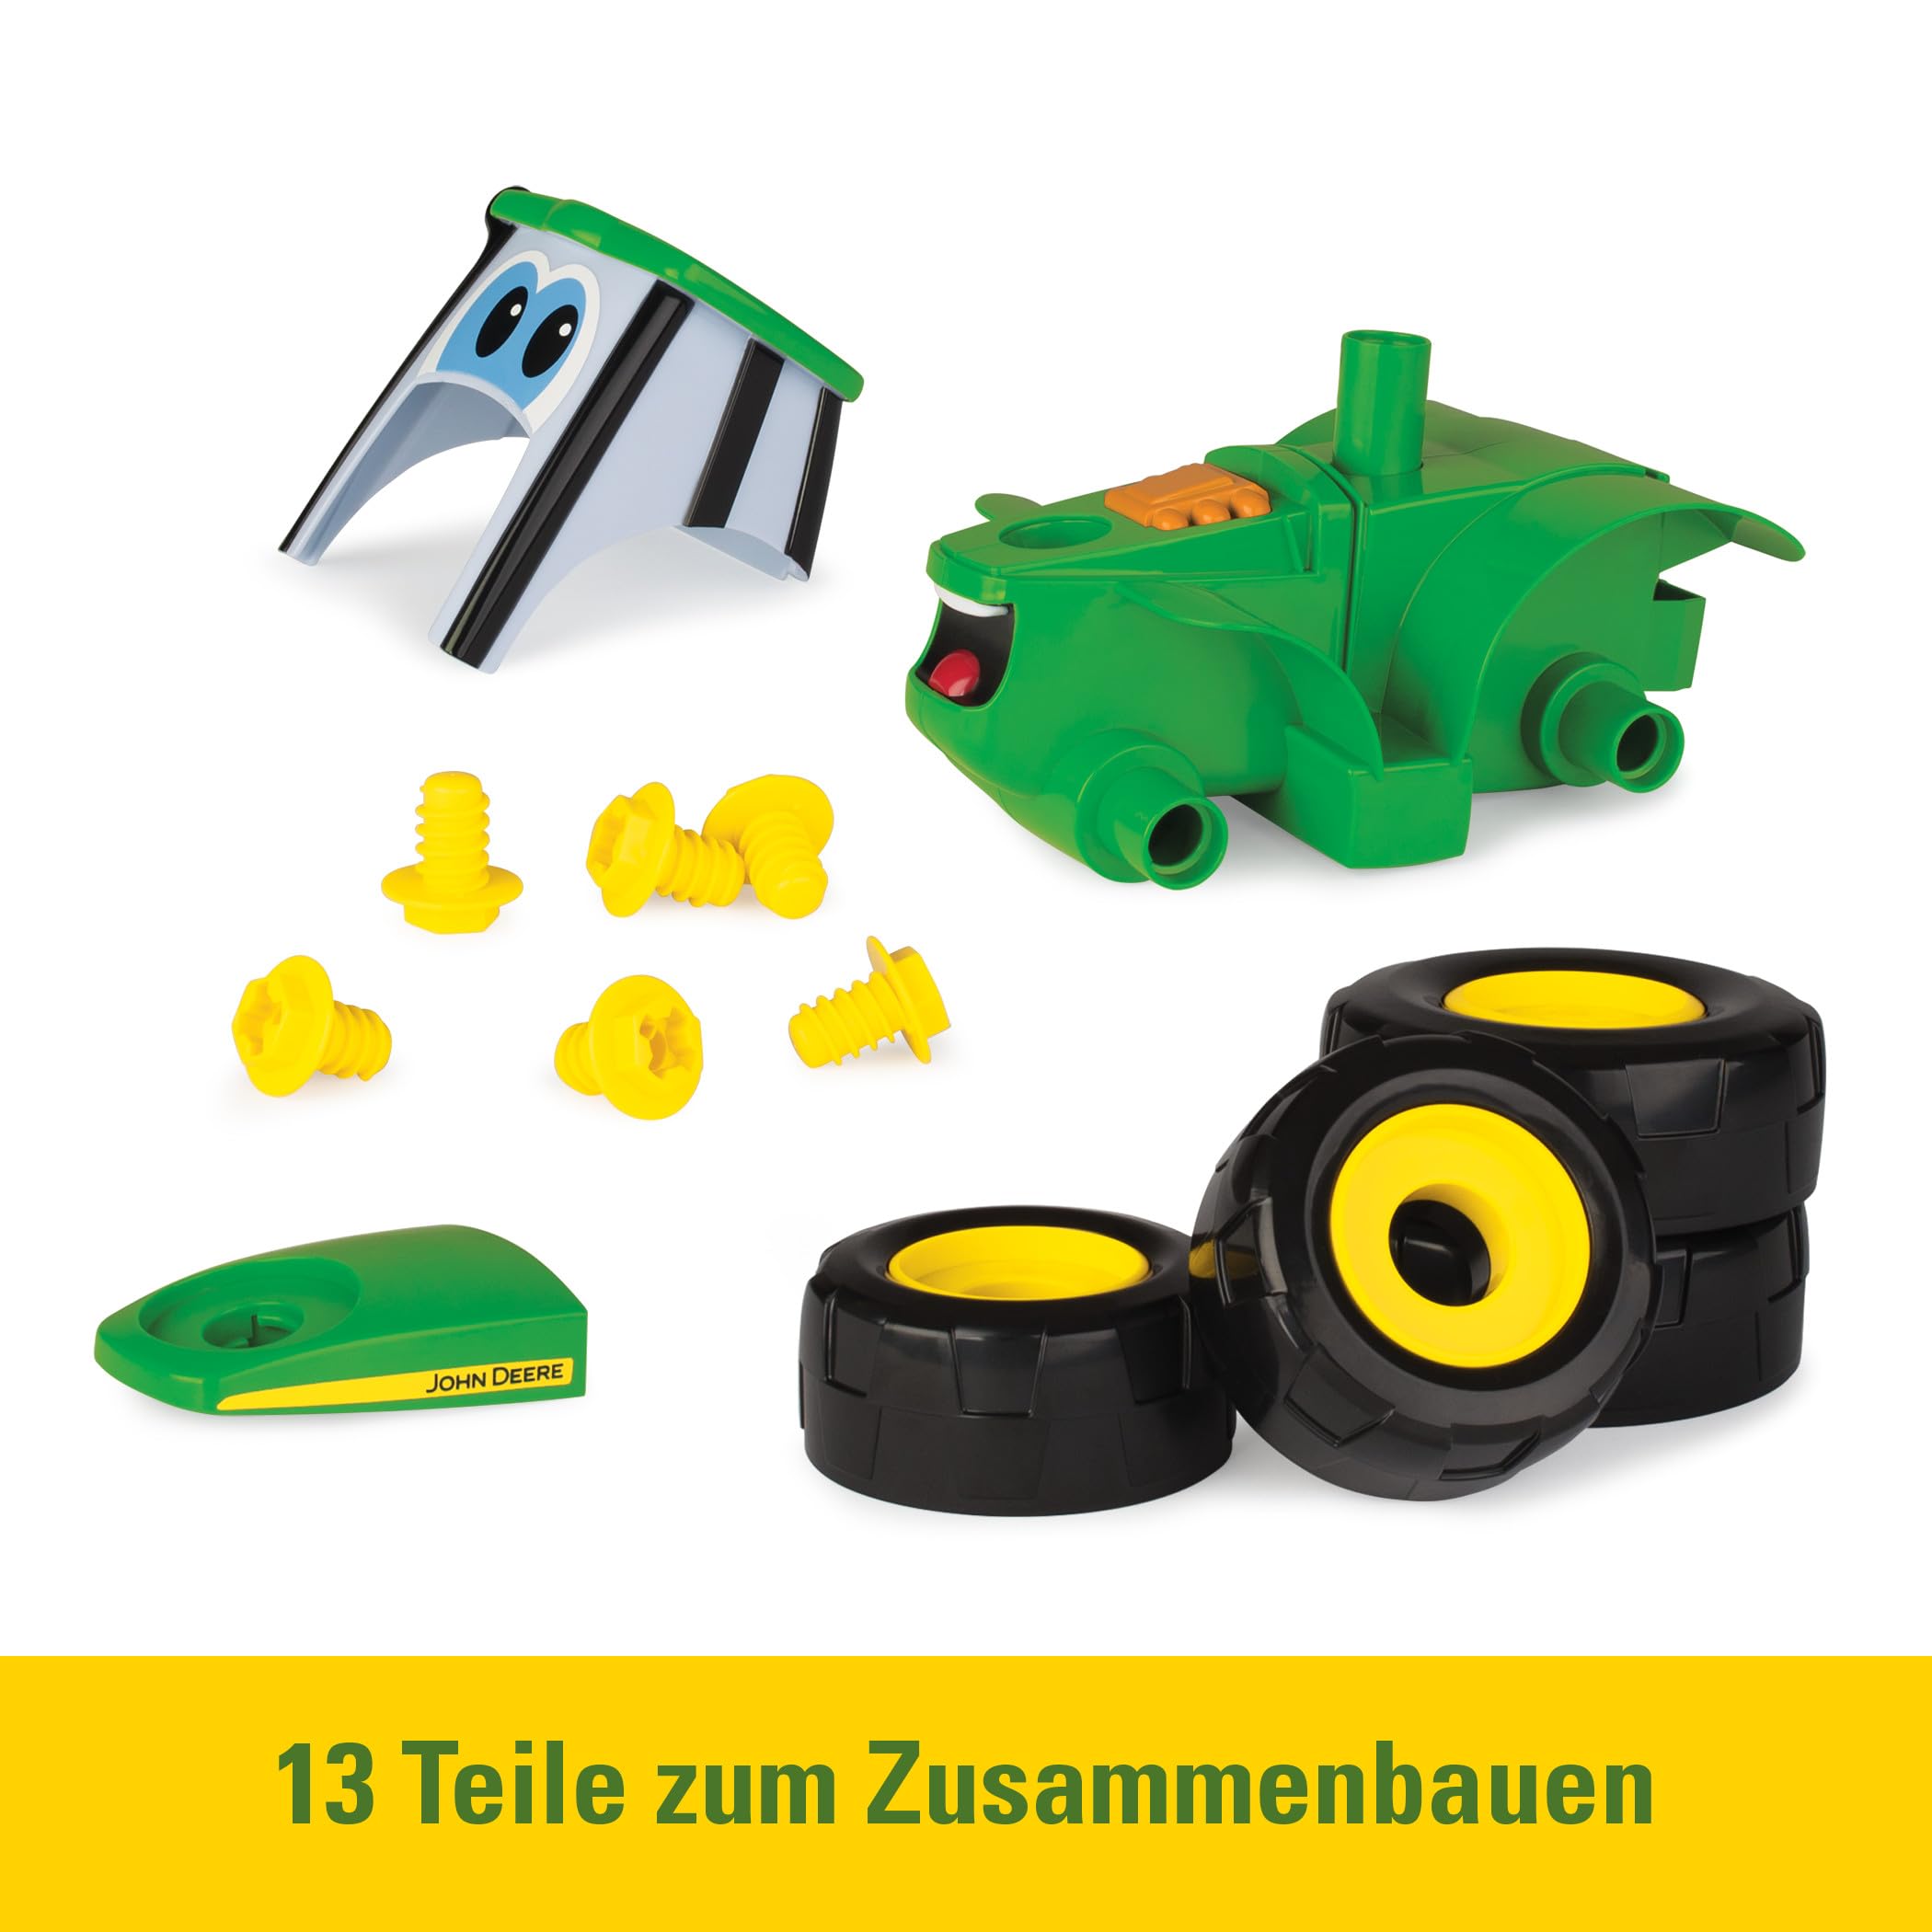 Tomy John Deere Build-A-Johnny Tractor Toy